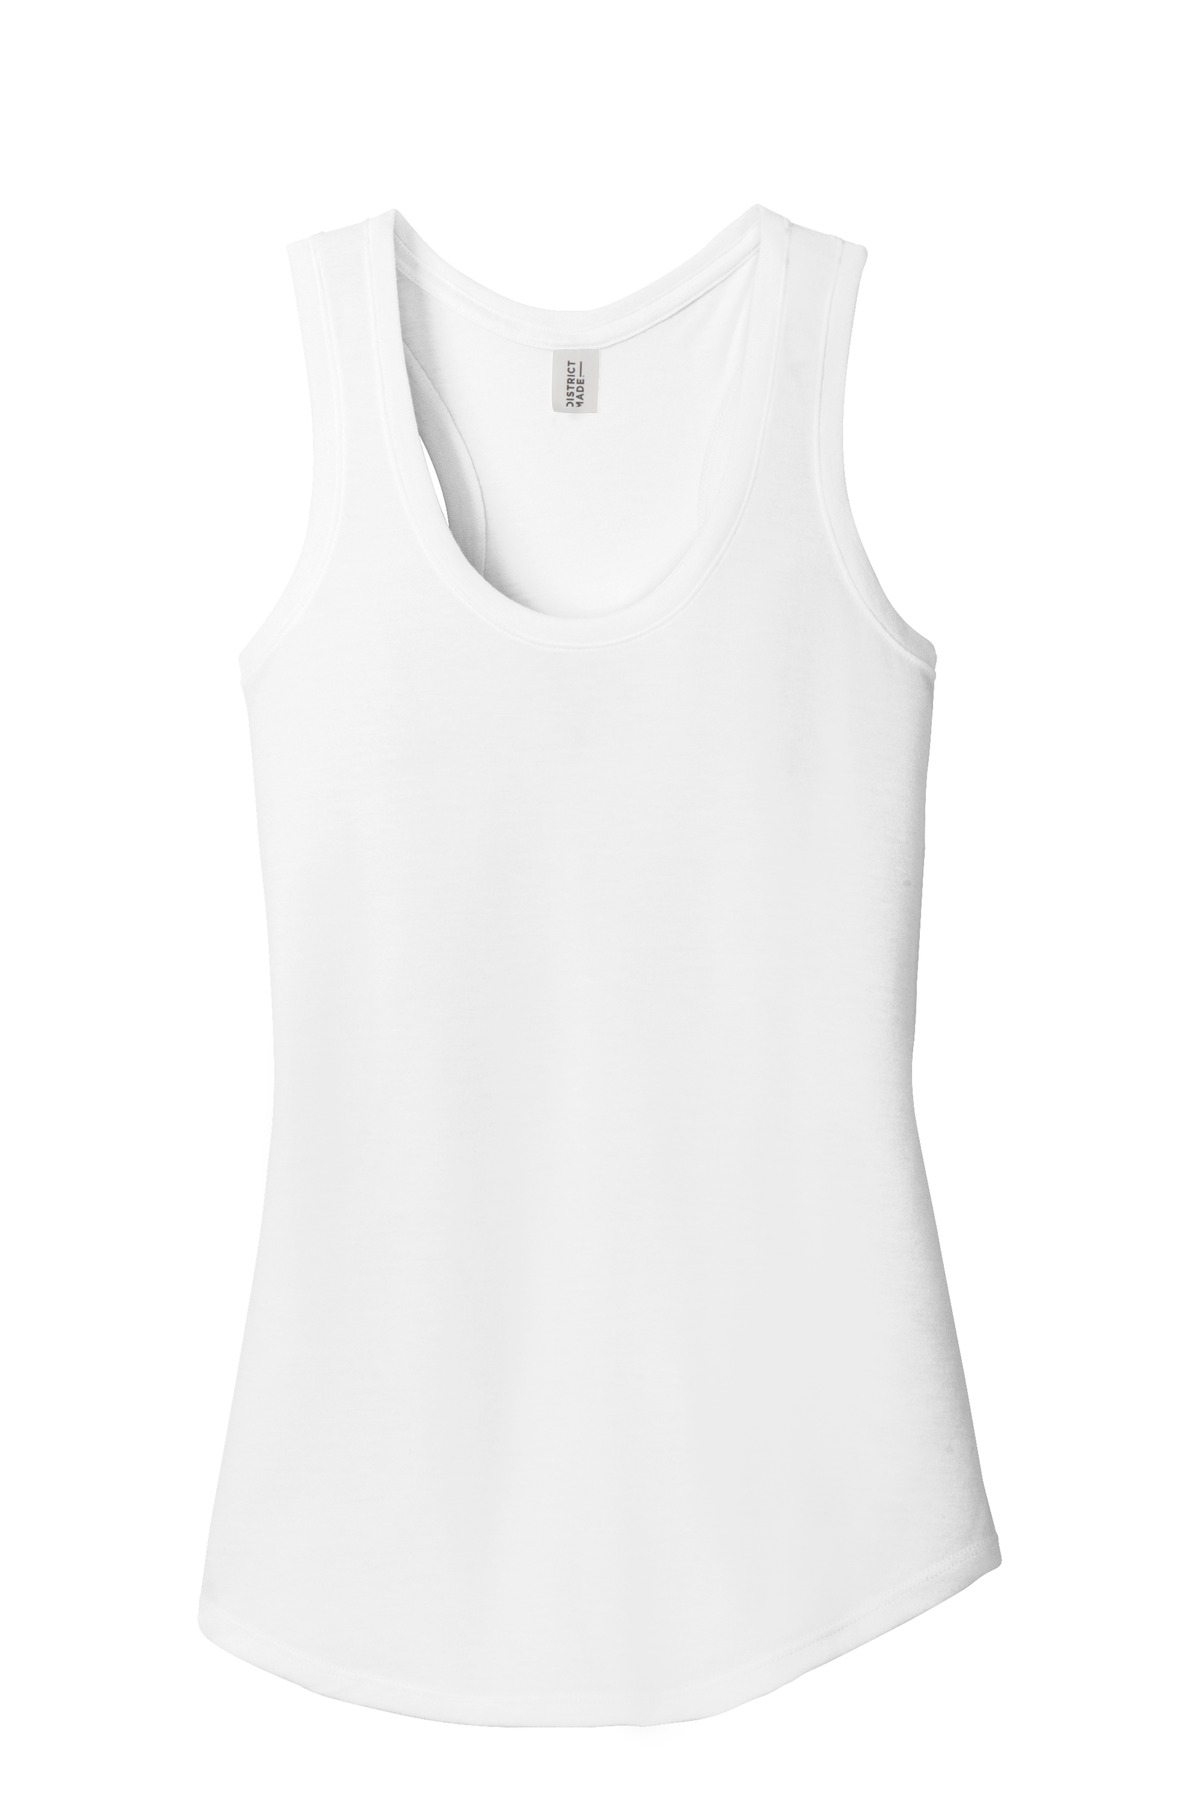 District ® Women's Perfect Tri ® Racerback Tank Questions & Answers